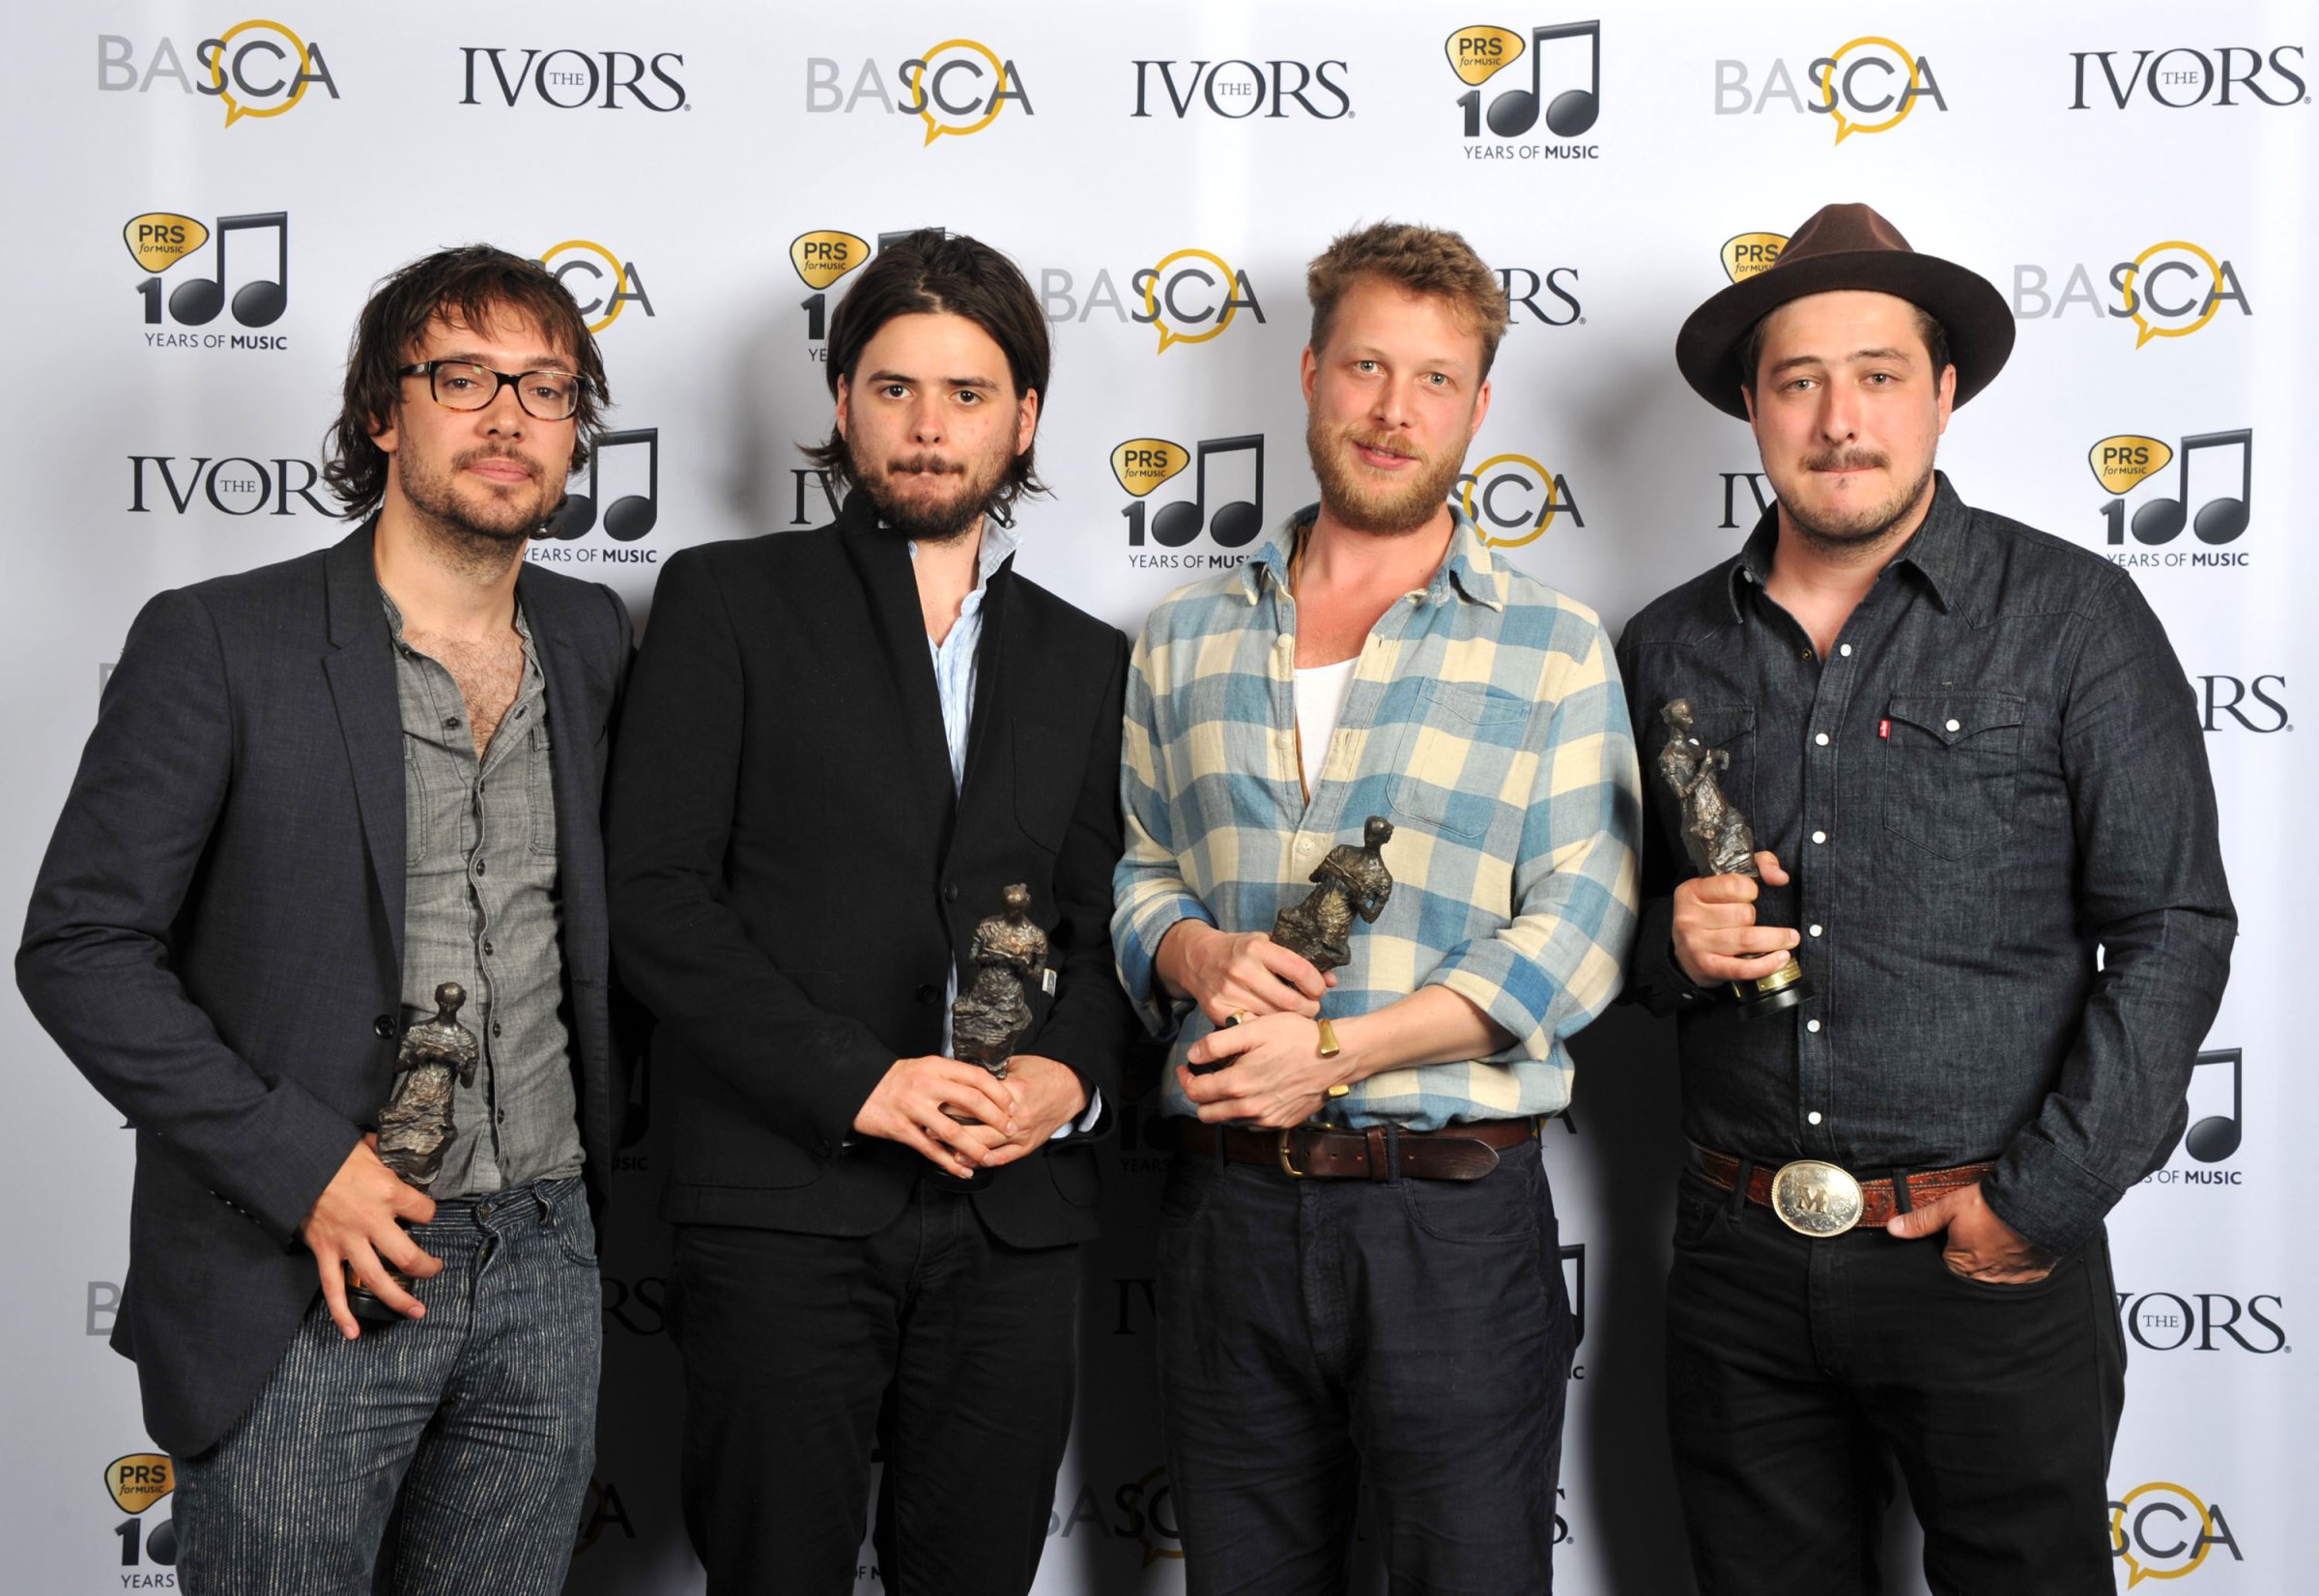 Mumford & Sons wins the International Achievement Awards at the 59th Ivor Novello Awards in London, England on May 22, 2014.